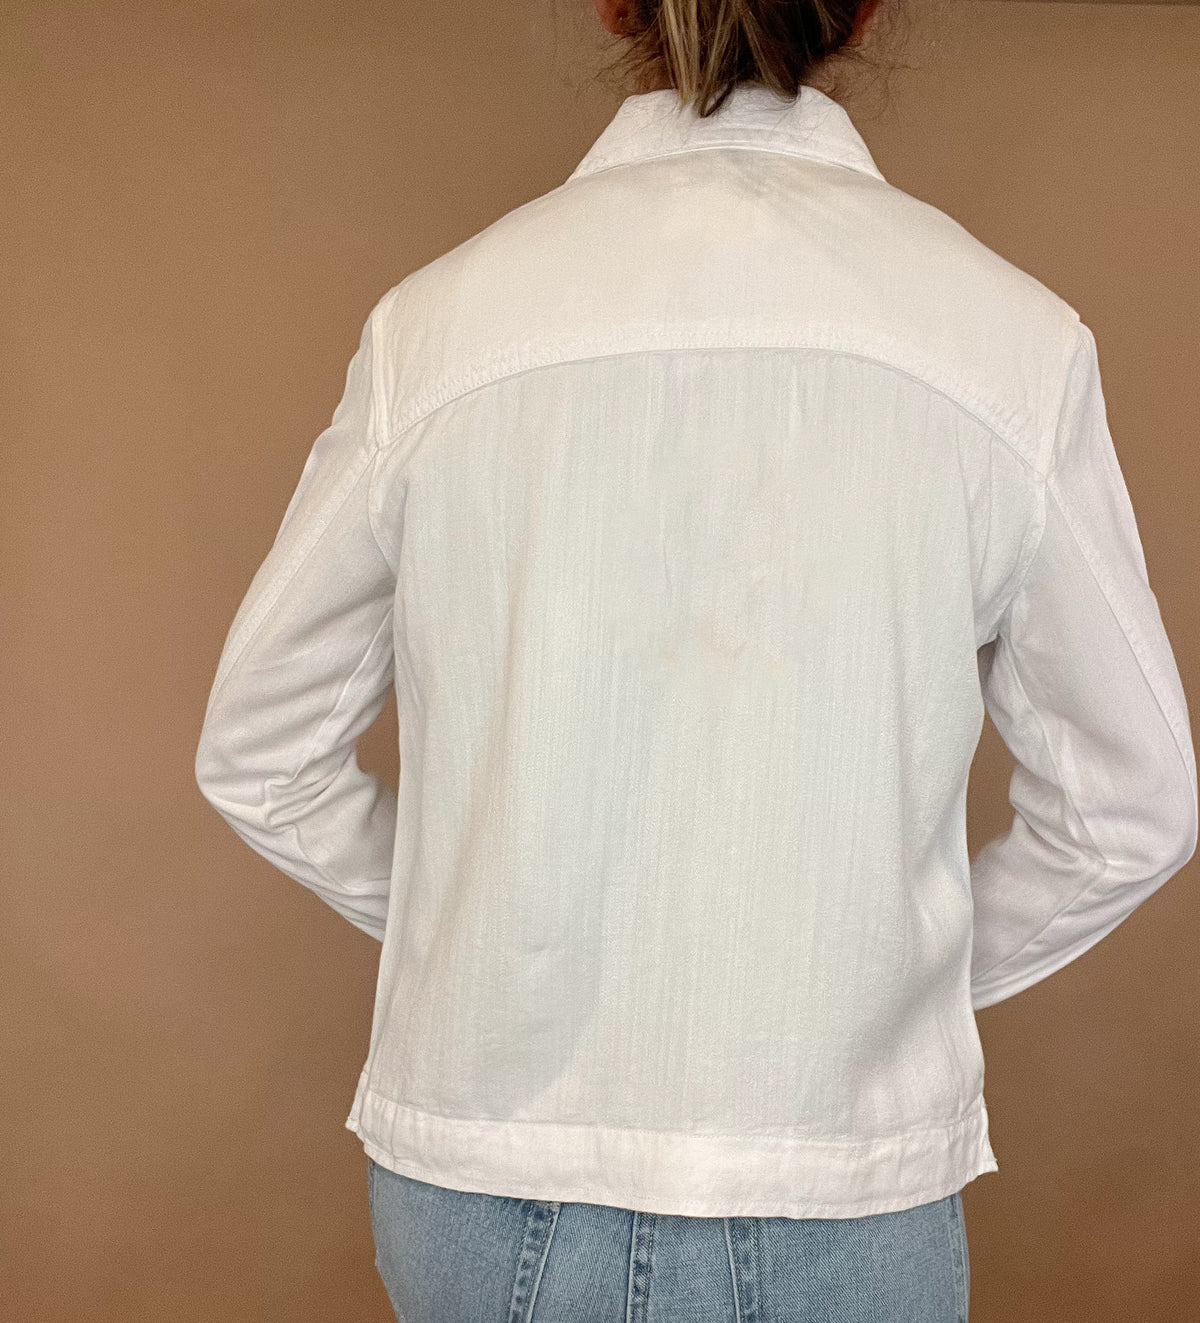 The "perfect" top layer for chic and casual looks, this white denim jacket is a must-have. With a stretchy fit that stays true to size, it features double chest pockets for practicality and style. Upgrade your wardrobe with this versatile jacket.